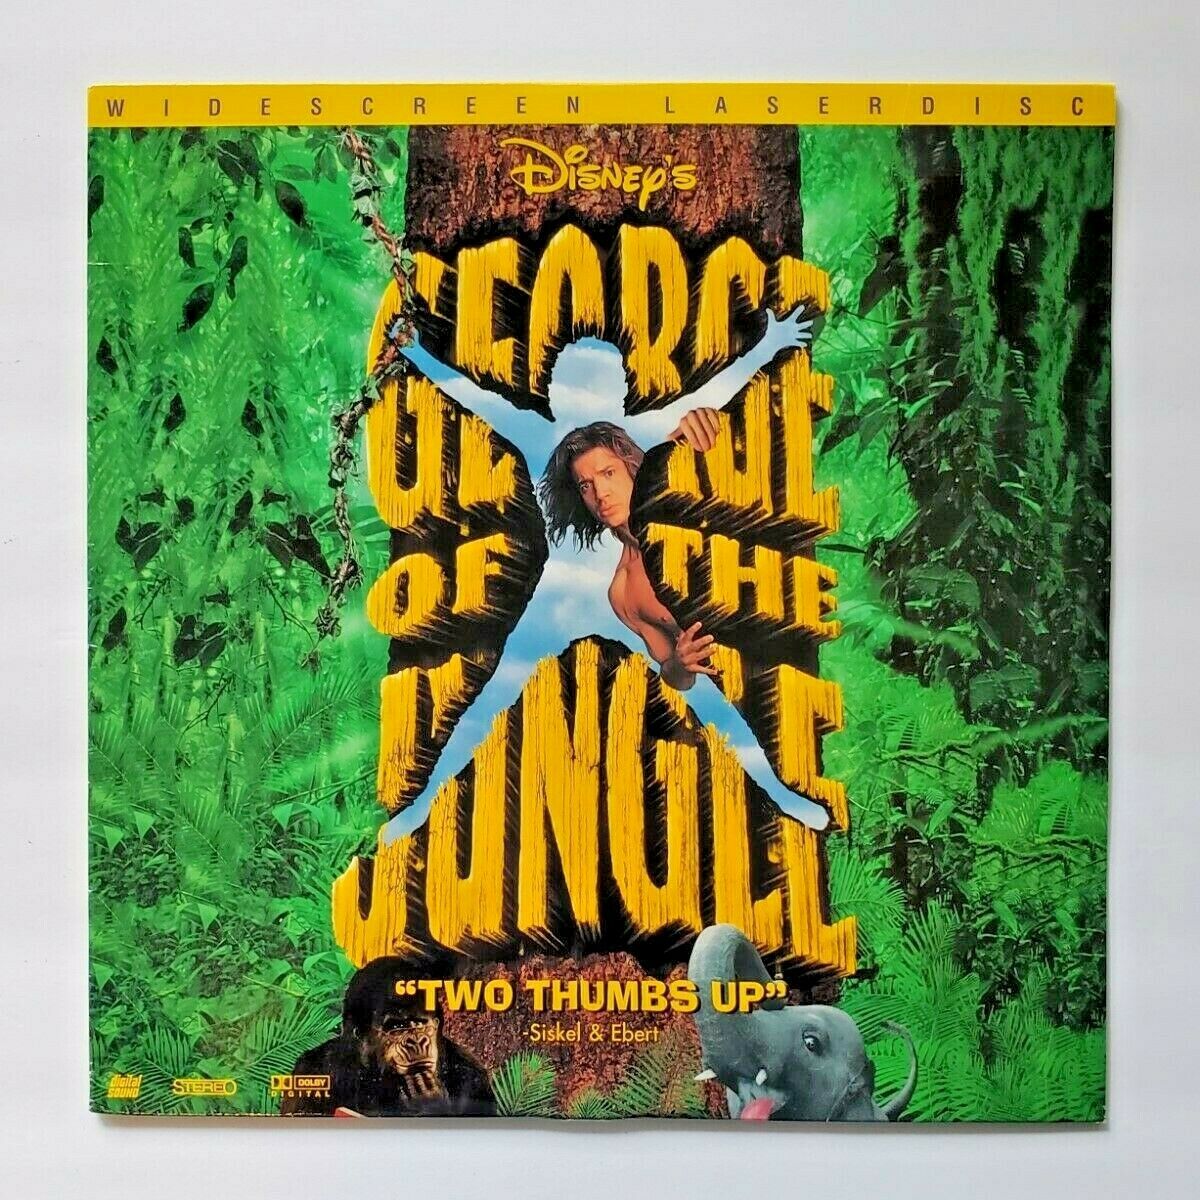 George of the Jungle (song), Disney Wiki